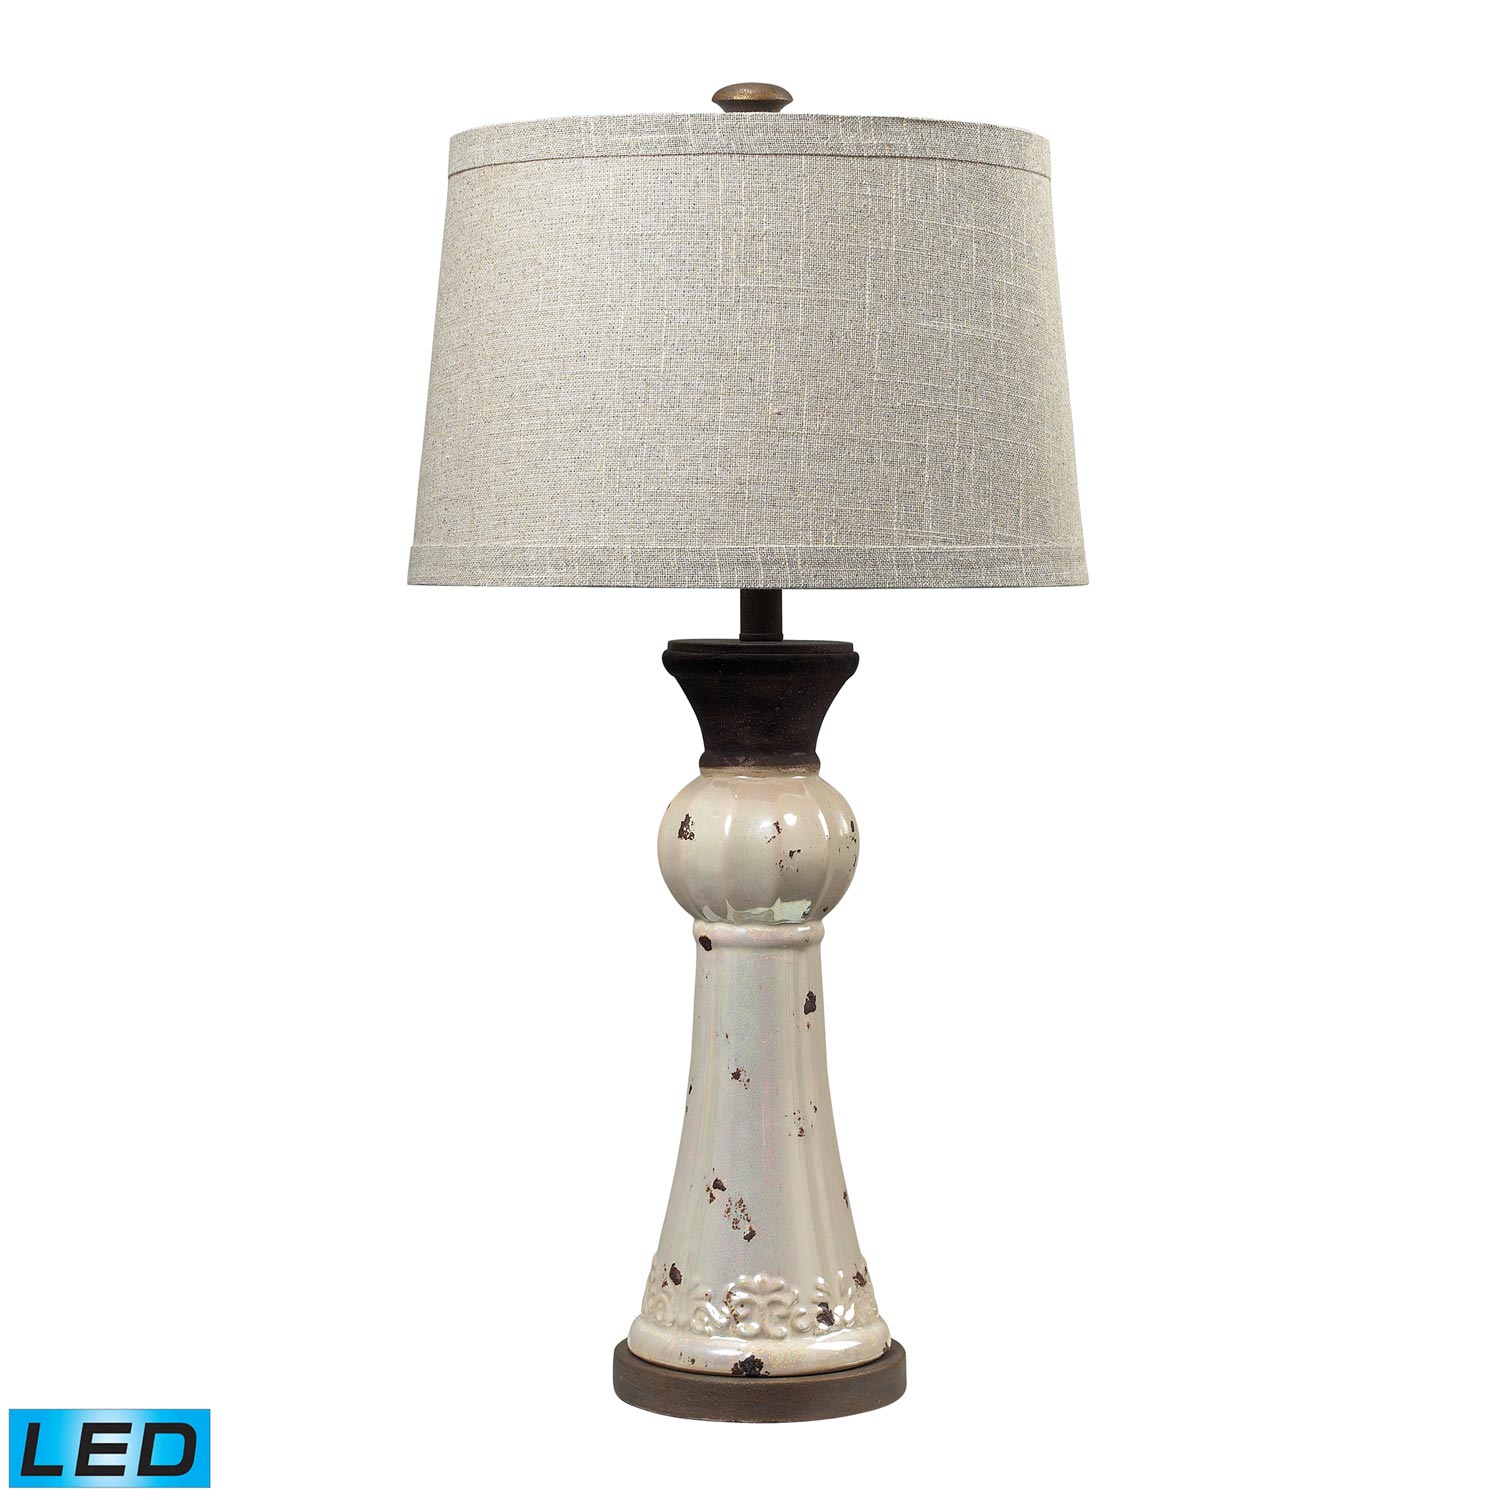 Elk Lighting 113-1127-LED Lorraine Table Lamp - Distressed Pearlescent with Rust